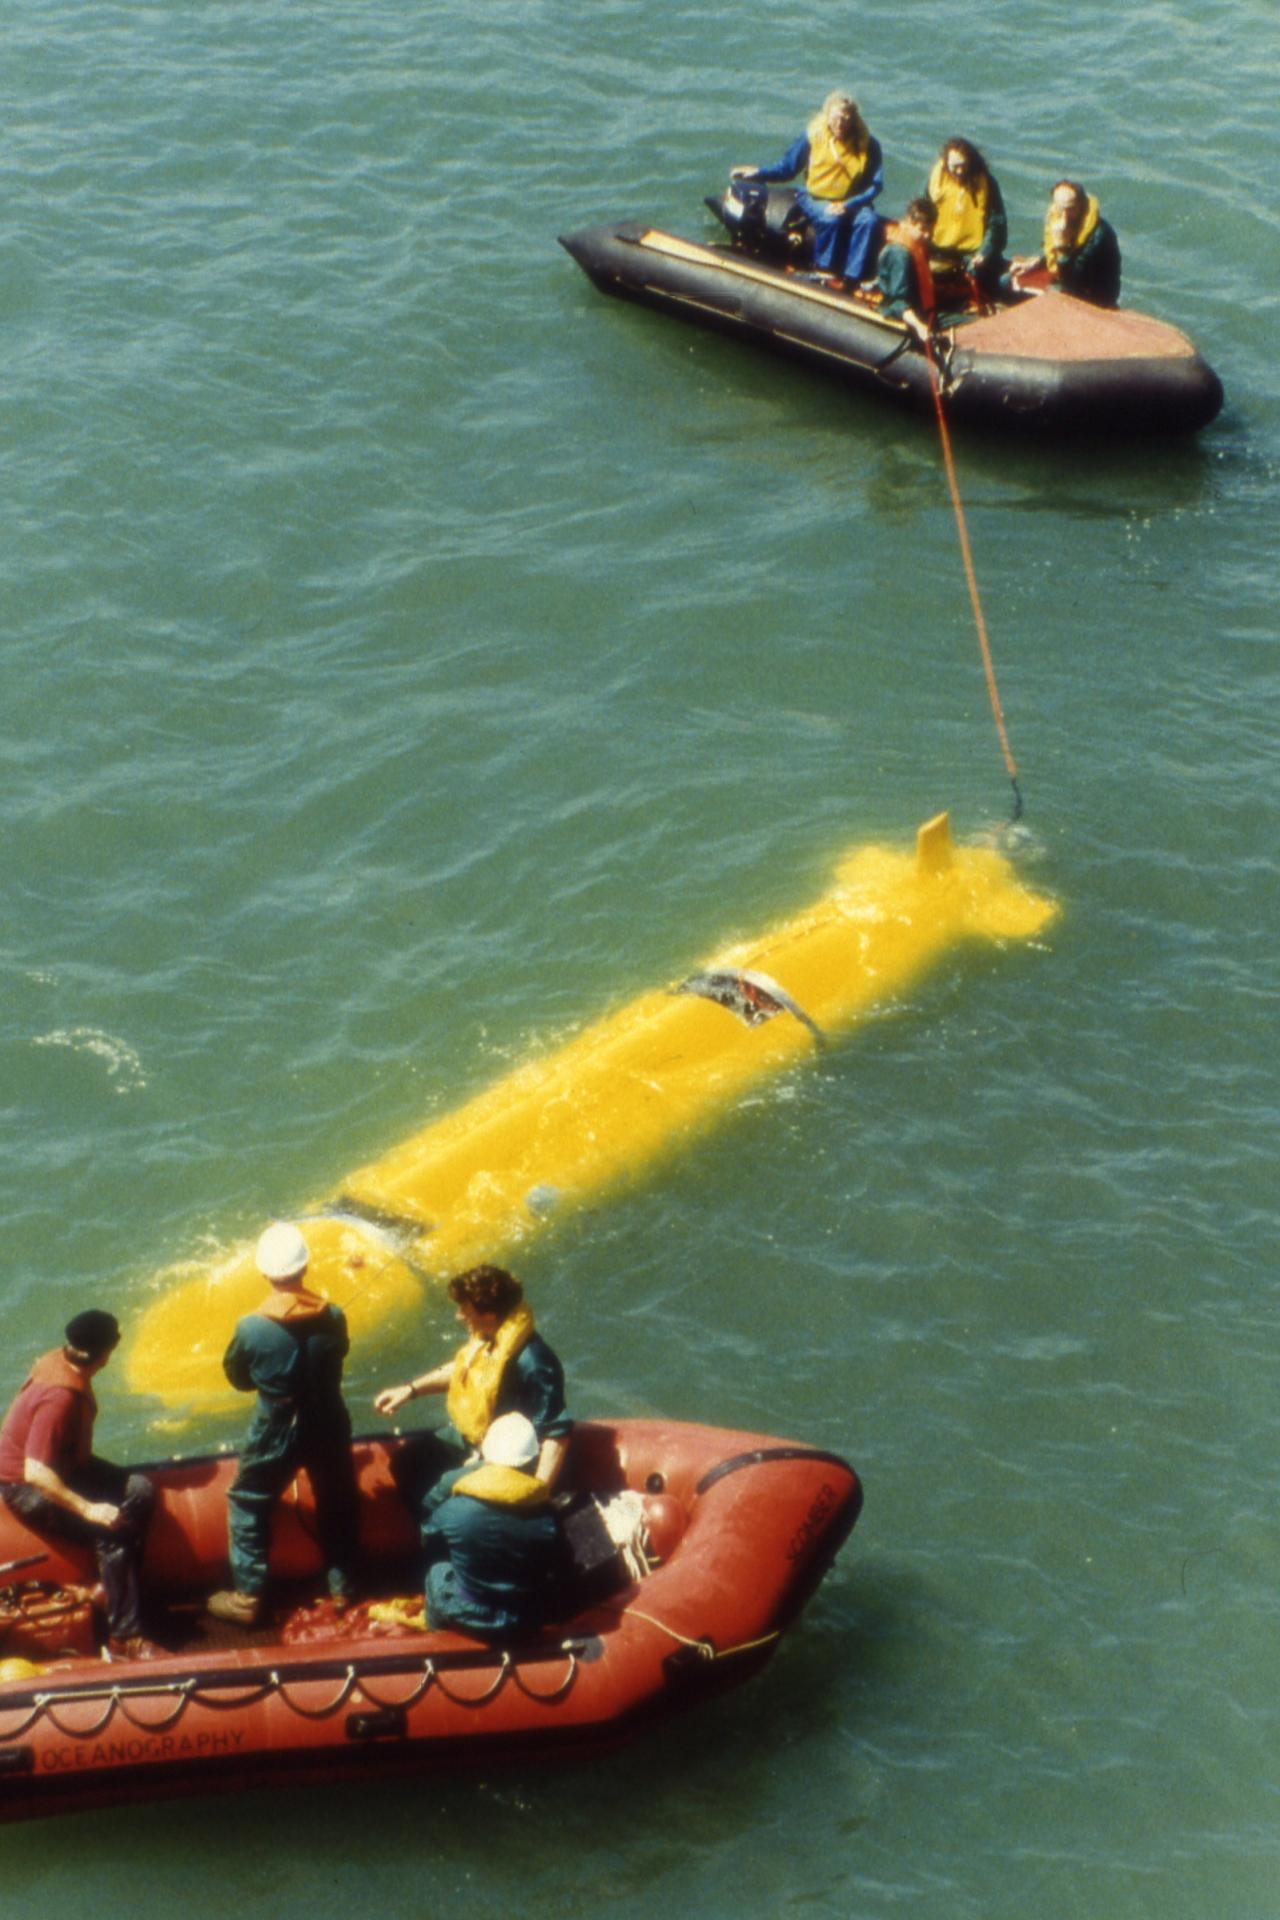 The NOC’s first Autosub mission in July 1996